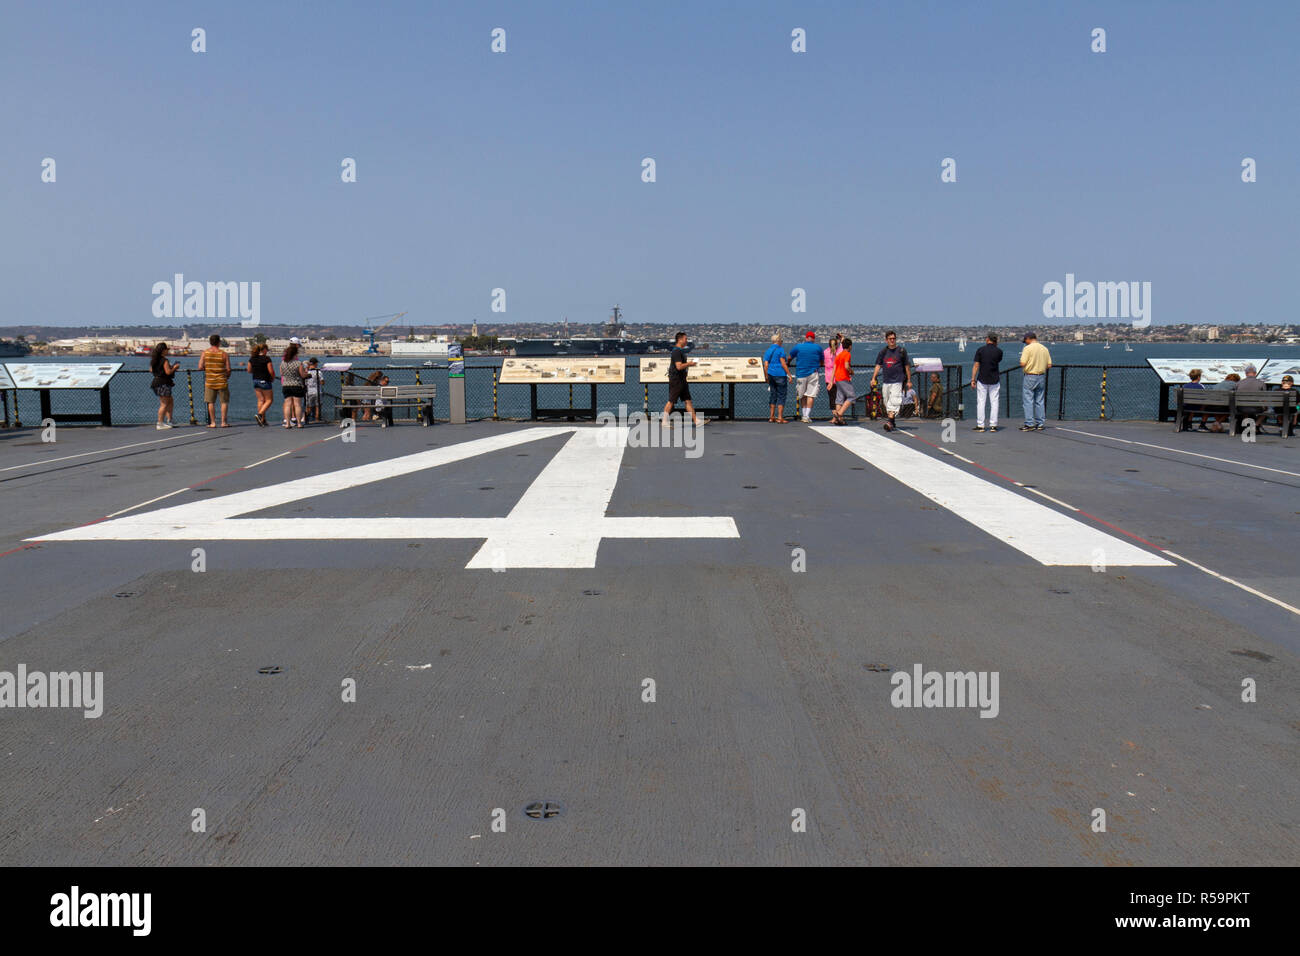 Hull classification number of the USS Midway (CV-41) on the flight deck of the USS Midway Museum, San Diego, California, United States Stock Photo